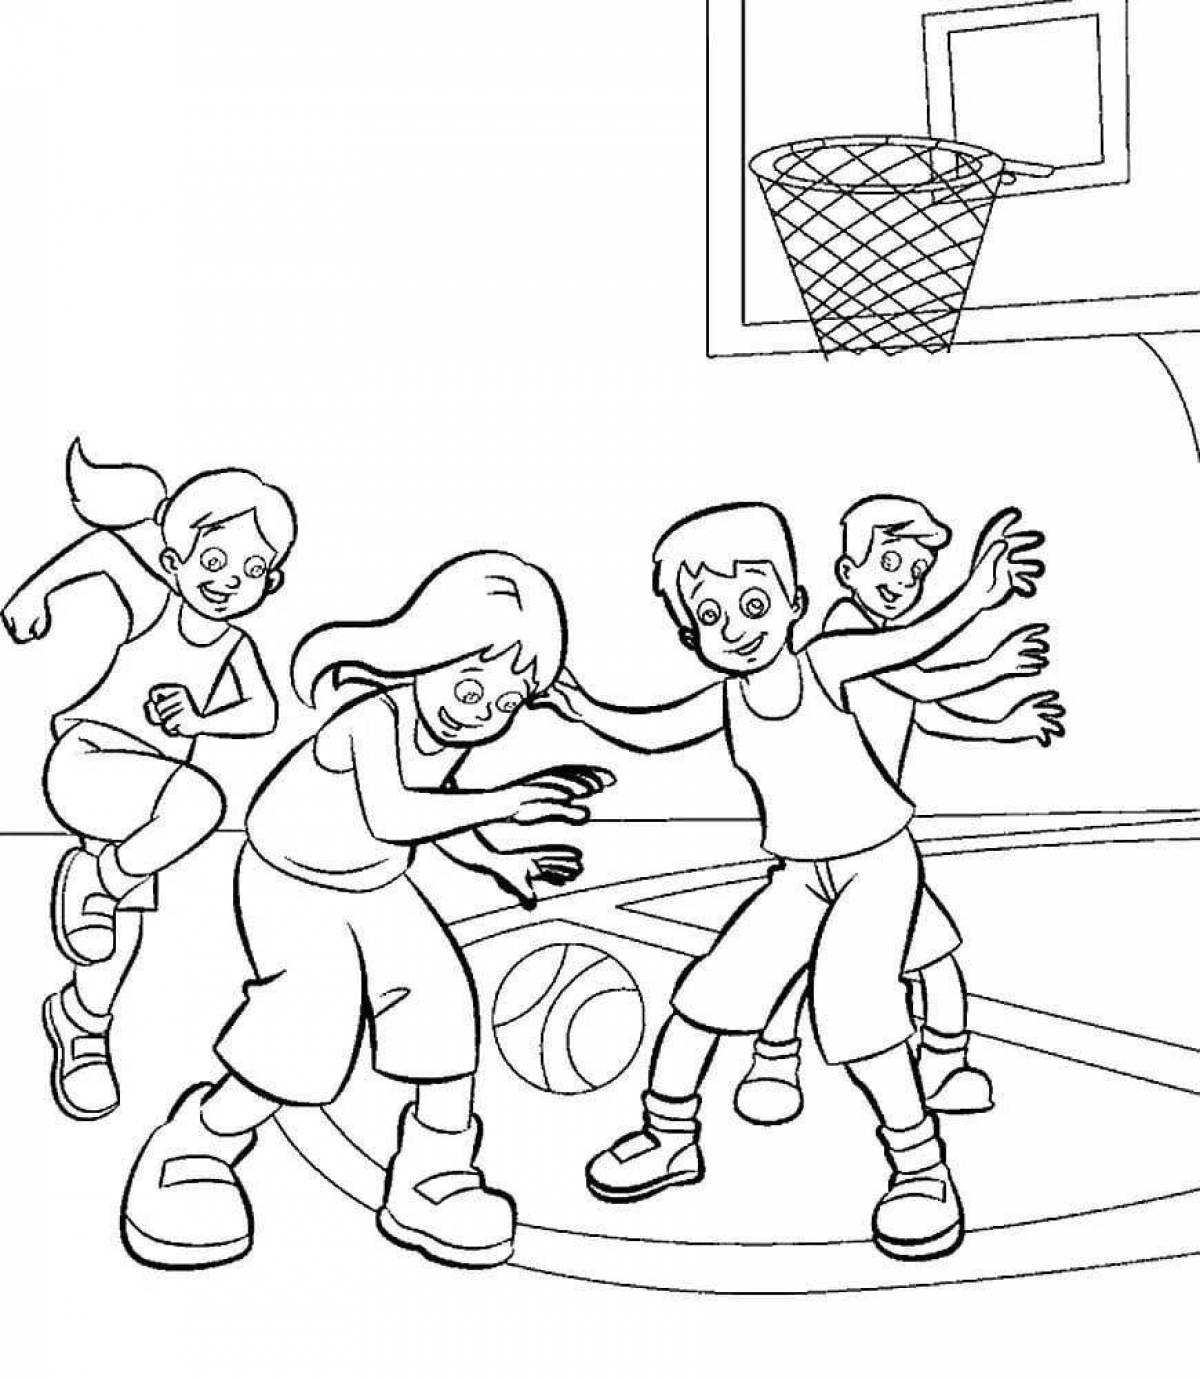 Colorful sports family coloring book